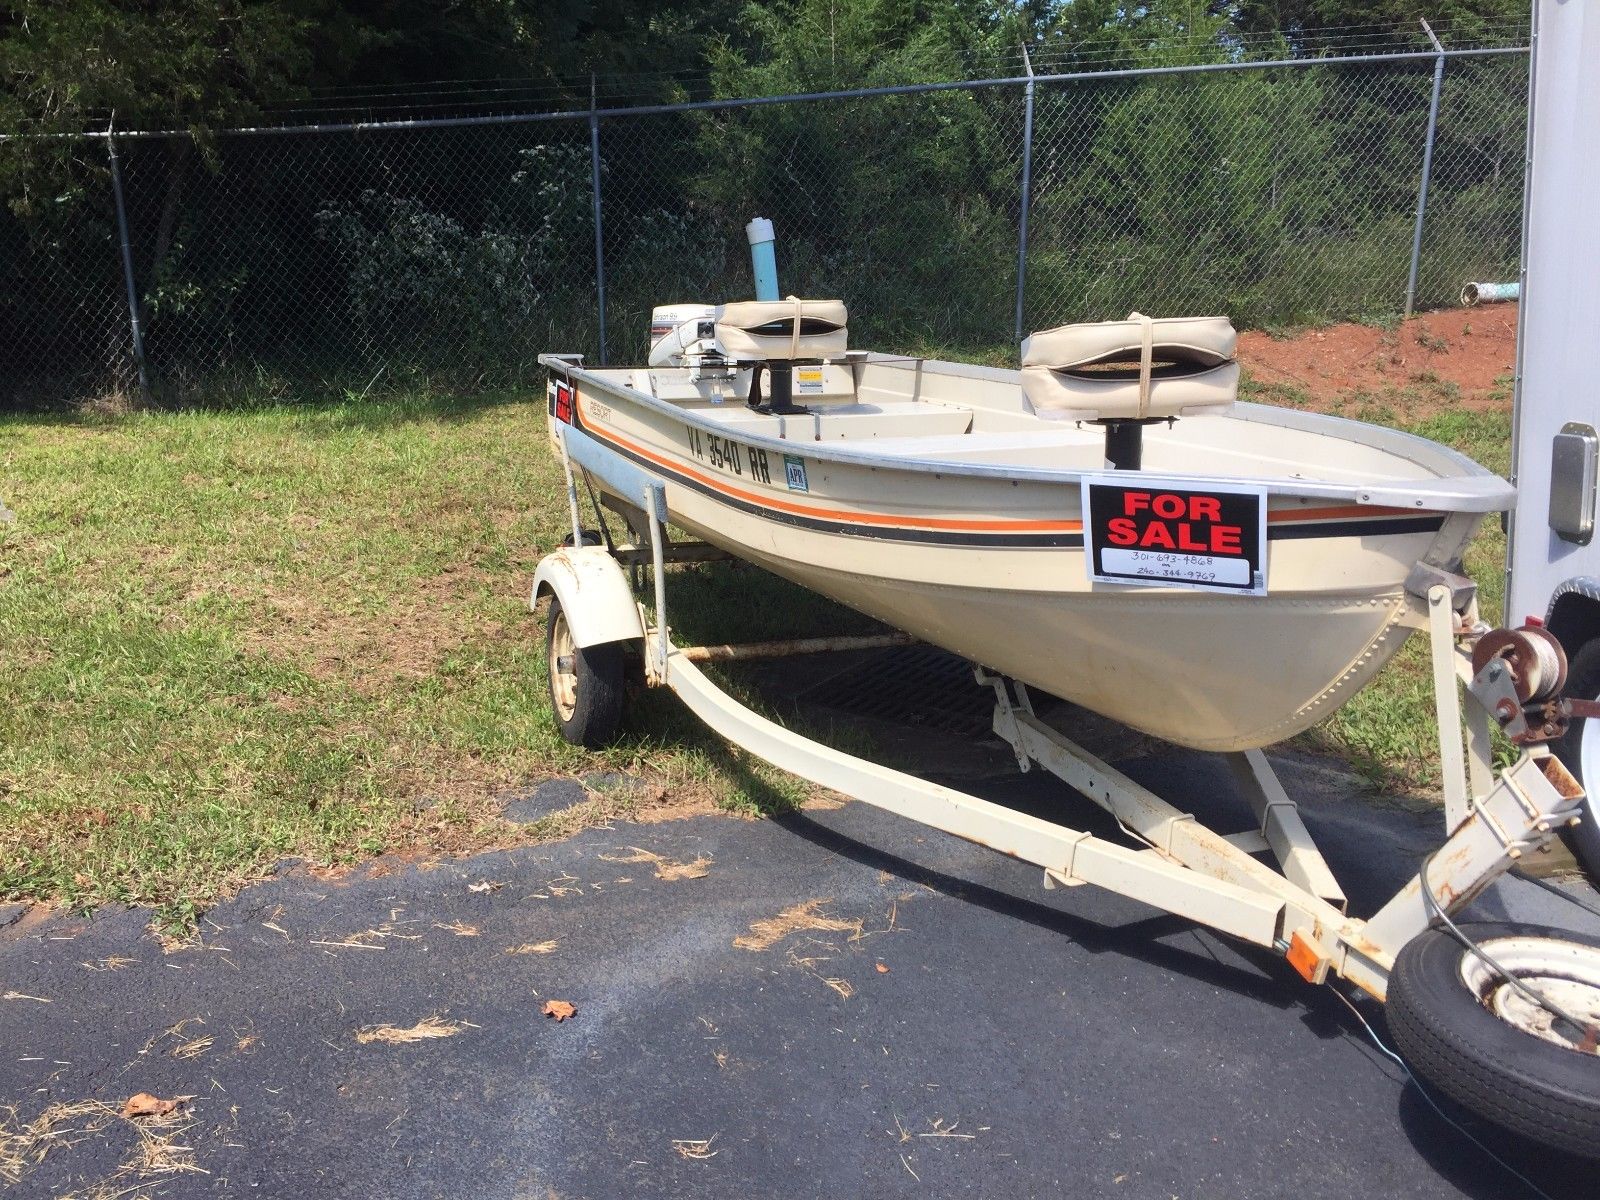 Mirrocraft RESORT 1981 for sale for $1,750 - Boats-from-USA.com